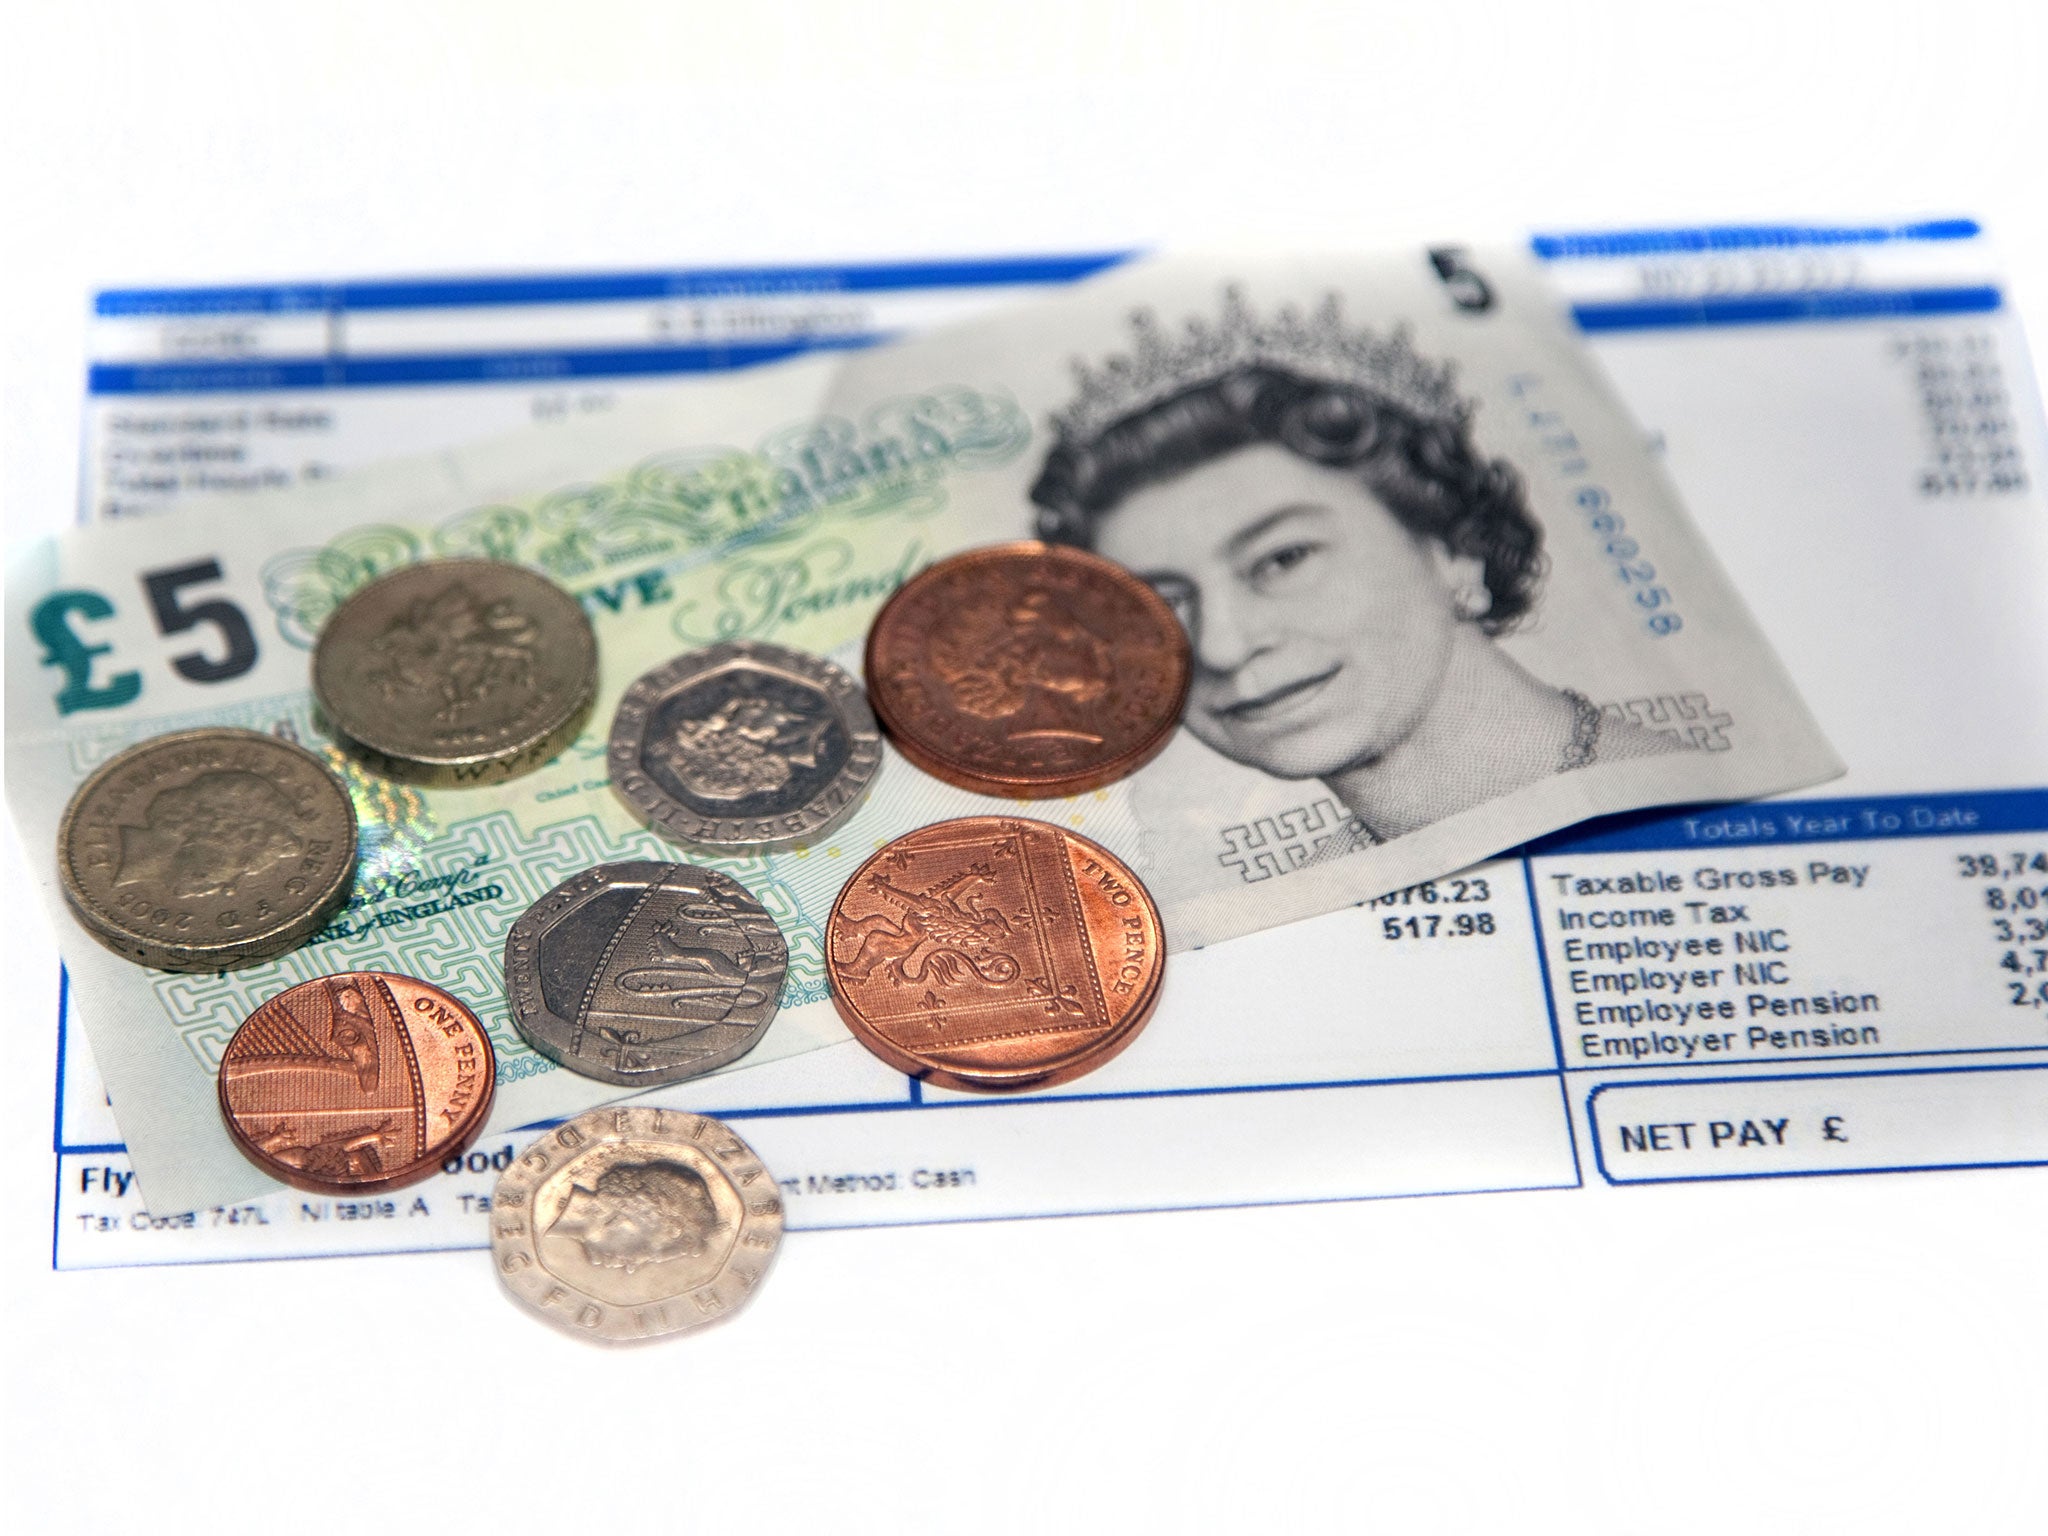 Over 25s on the national living wage will receive a pay rise